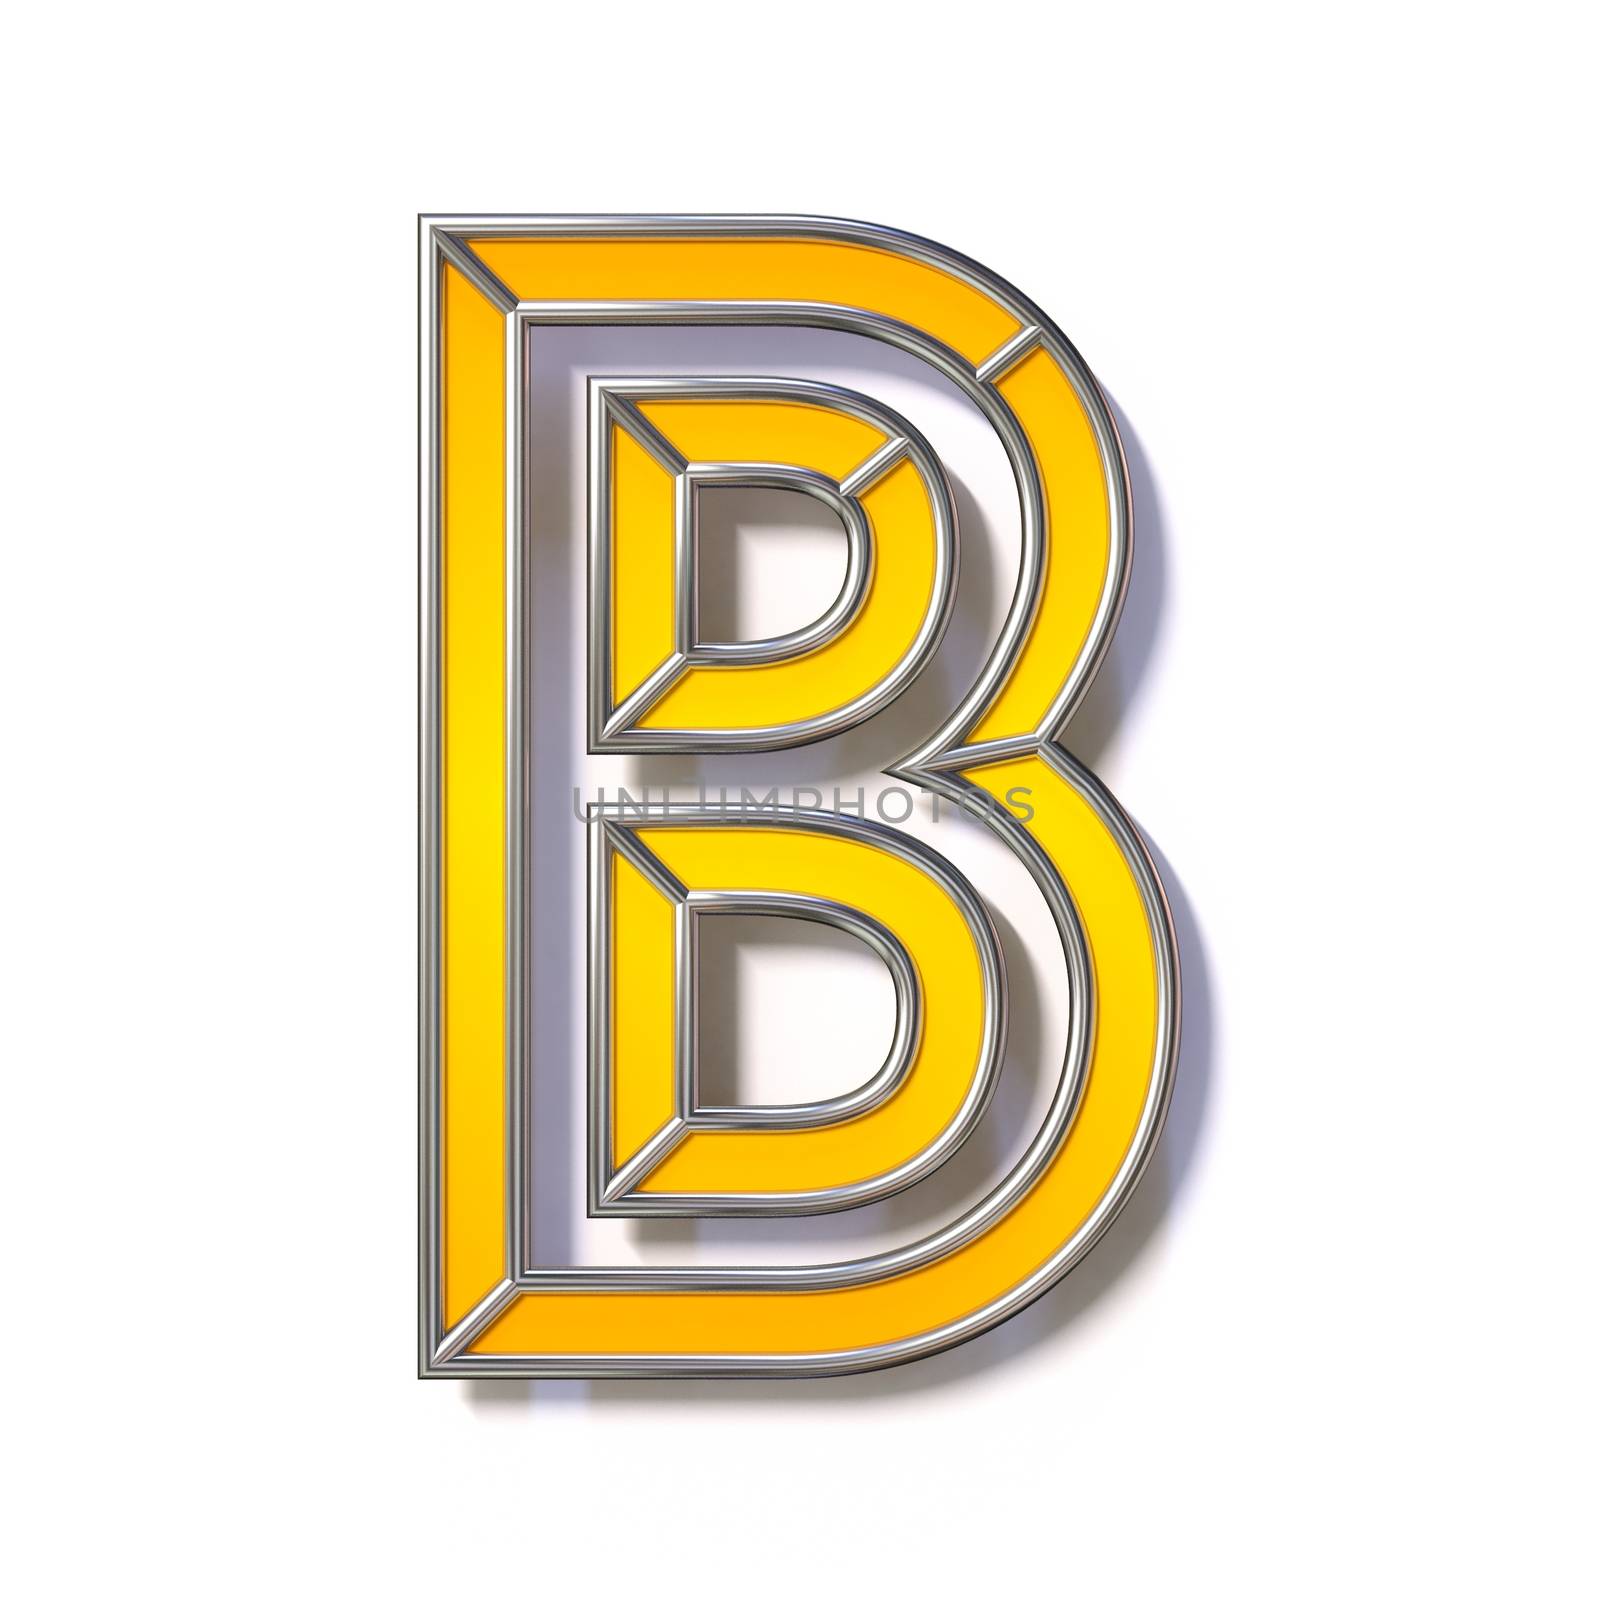 Orange metal wire font Letter B 3D rendering illustration isolated on white background